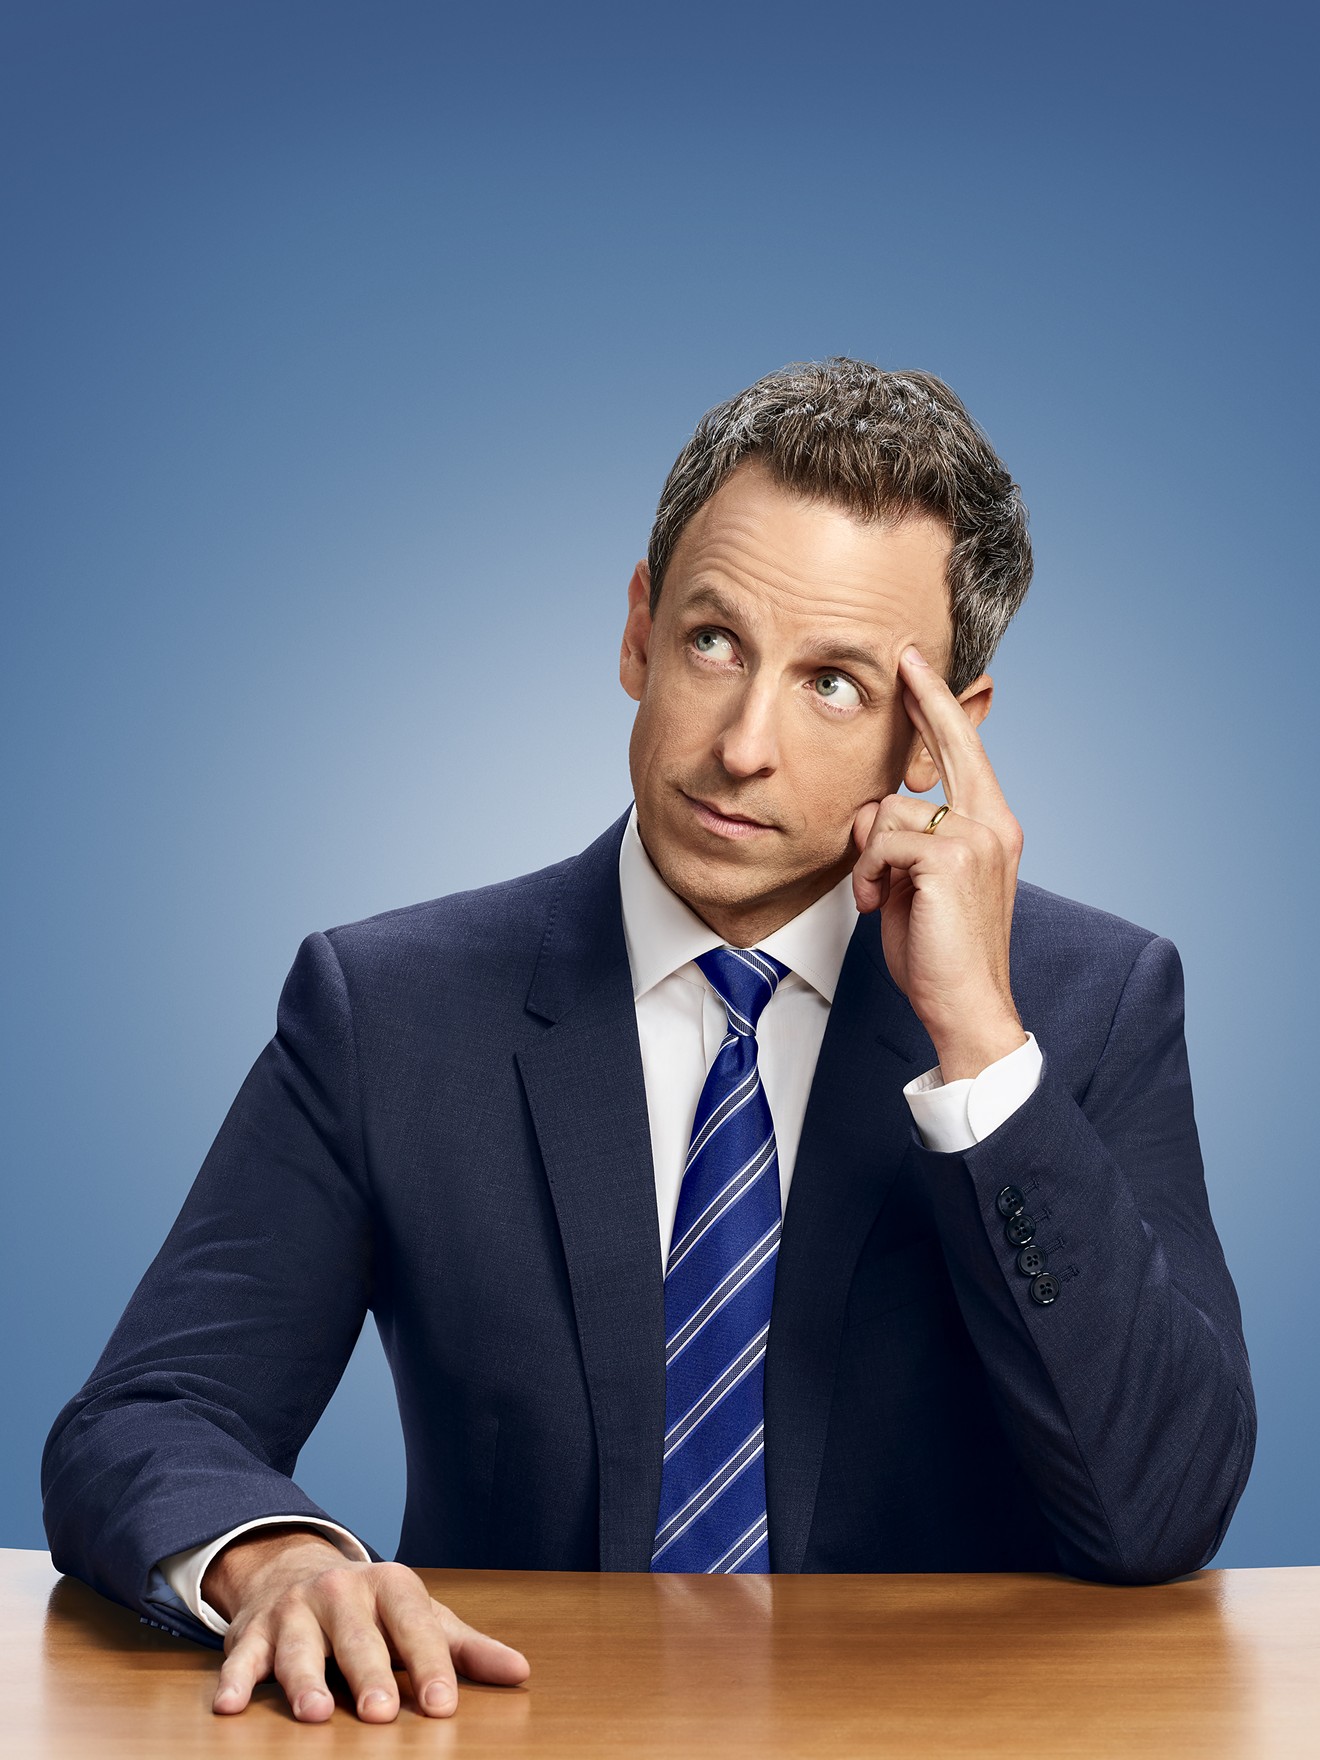 Seth Meyers can wait all night, mister, so don't expect him to namedrop you-know-who at The Majestic.